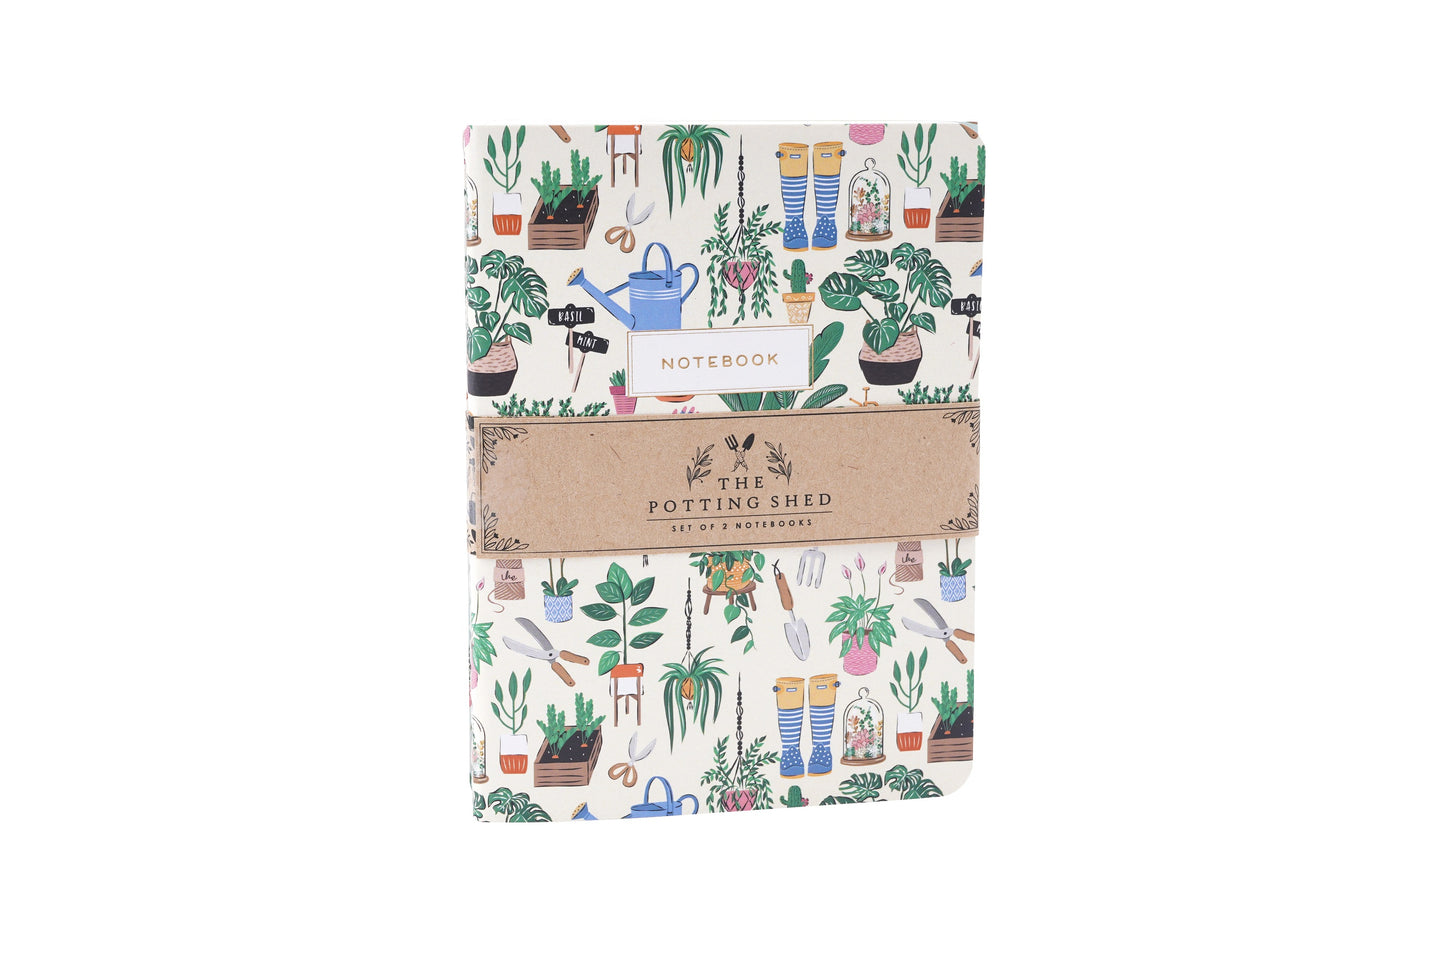 Notebook | The Potting Shed